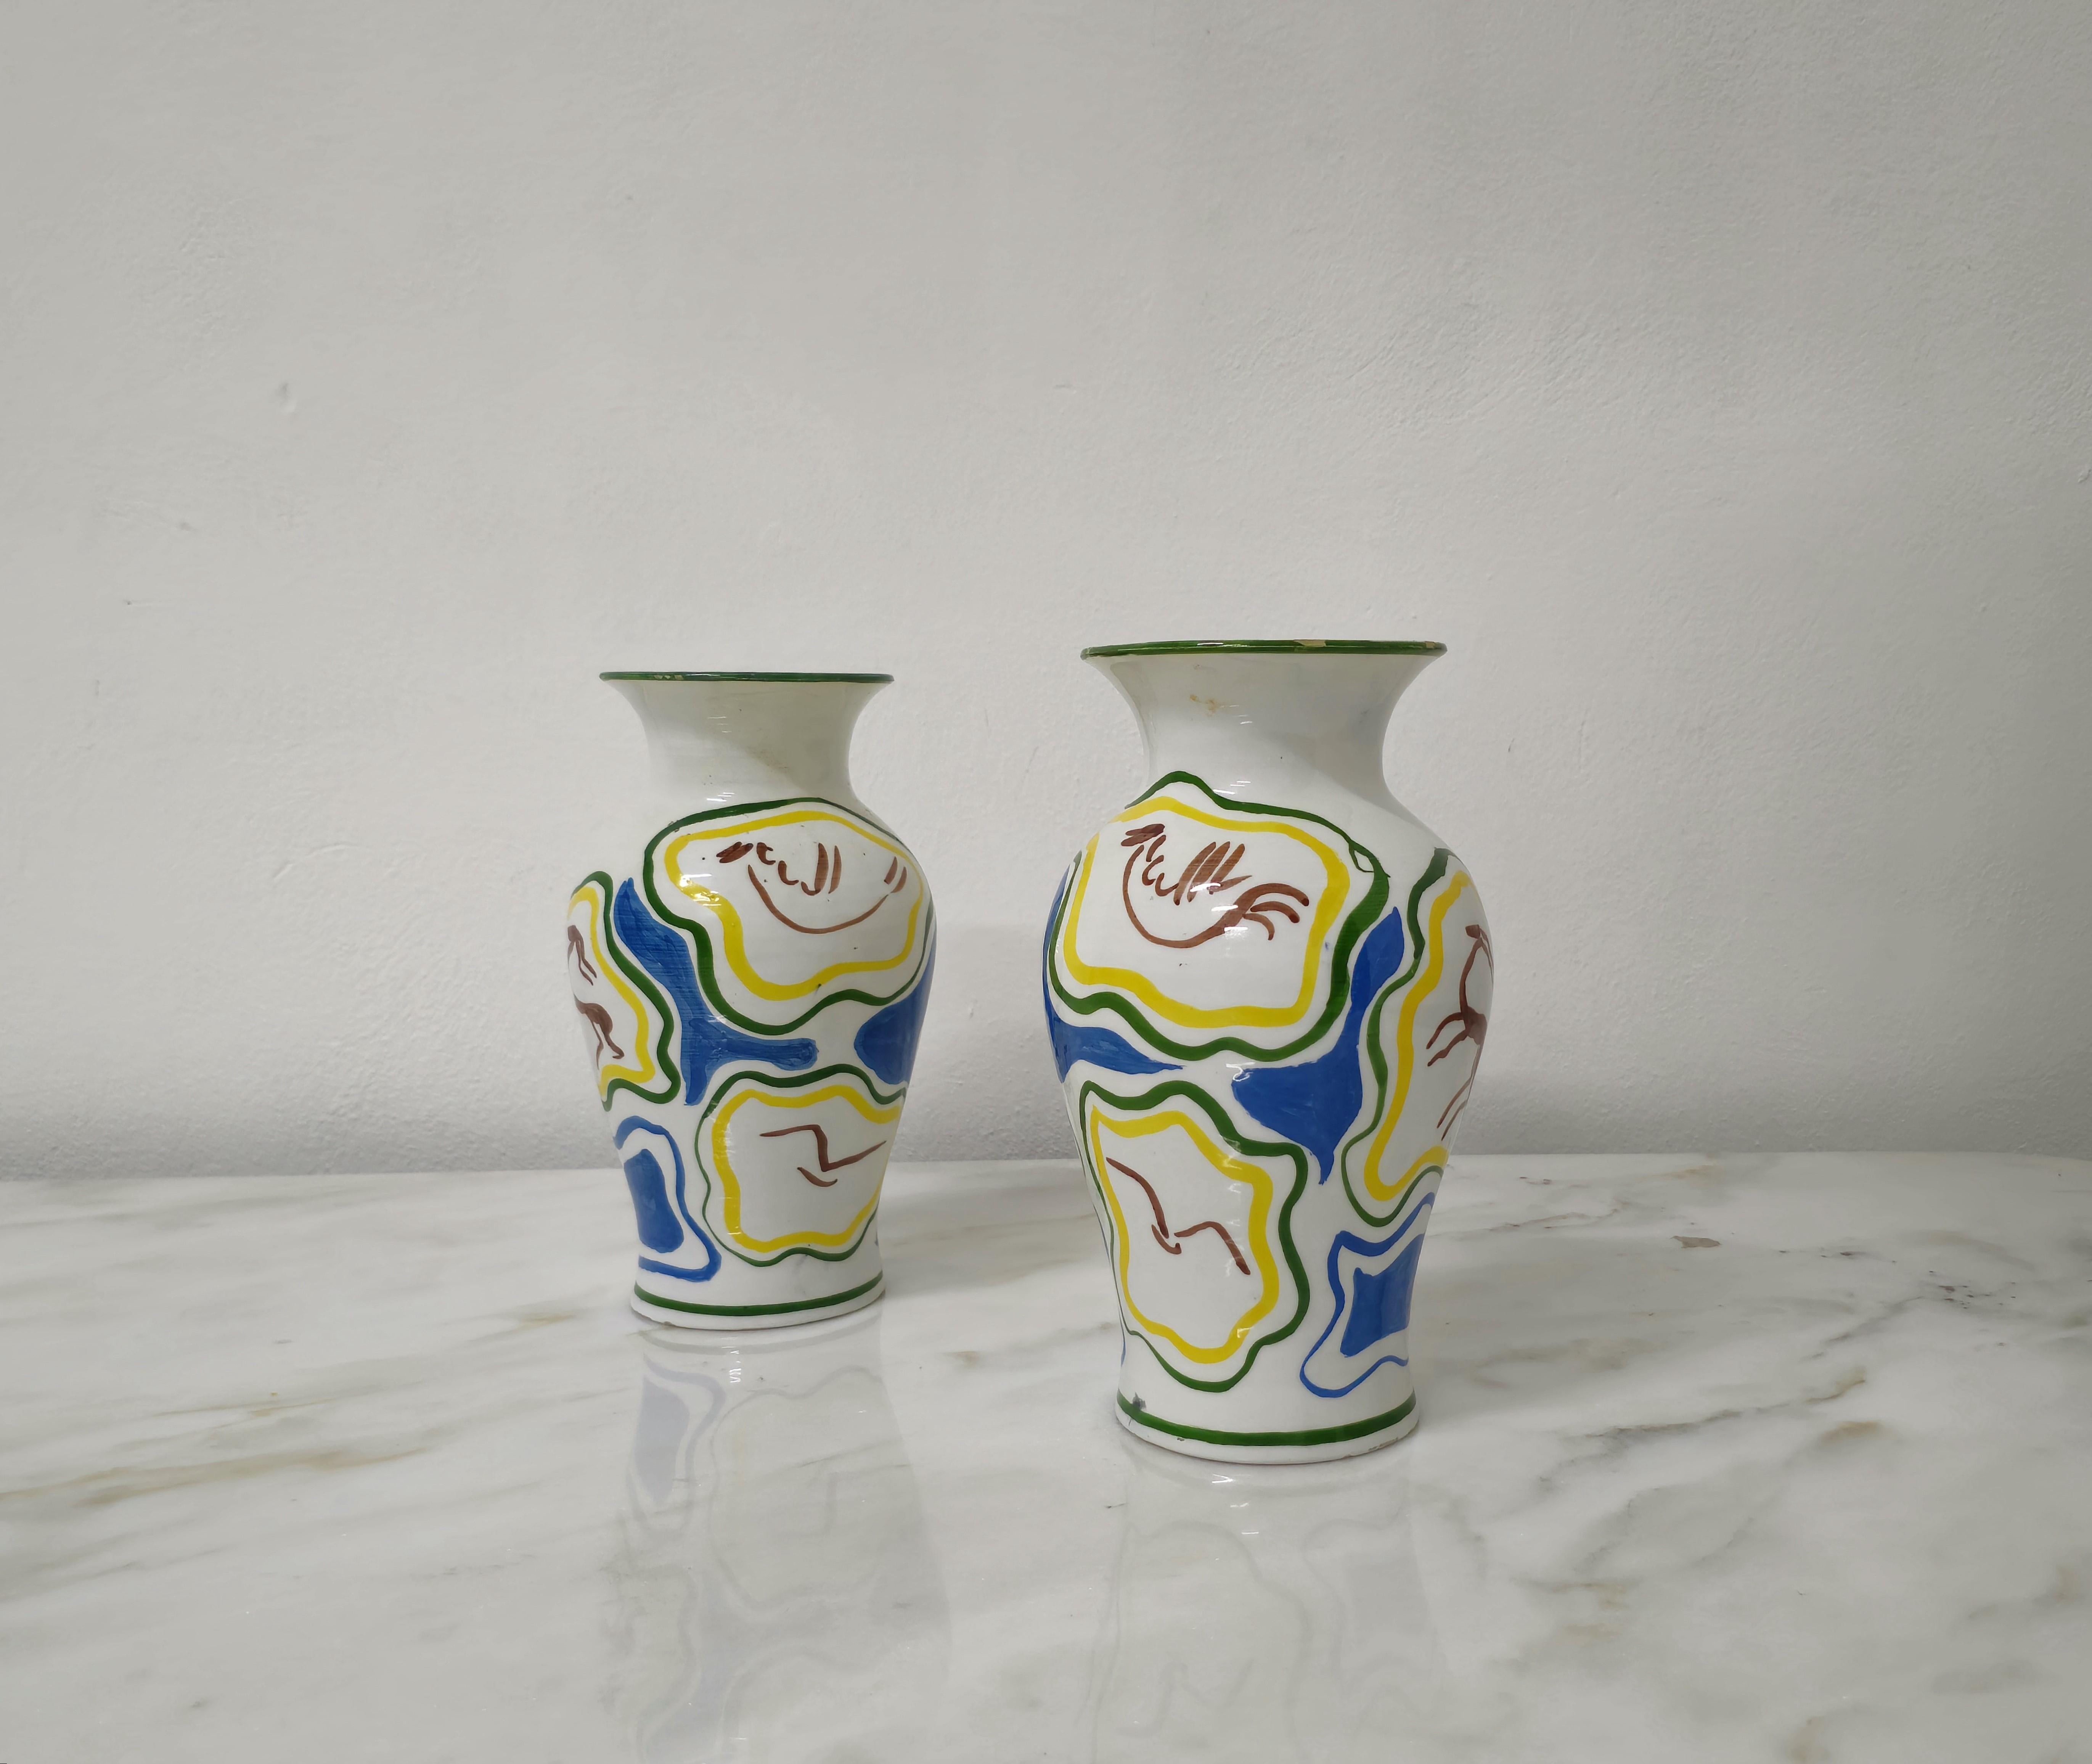 20th Century Decorative Objects Vases Ceramic Enamelled Midcentury Italy 1960s Set of 2 For Sale